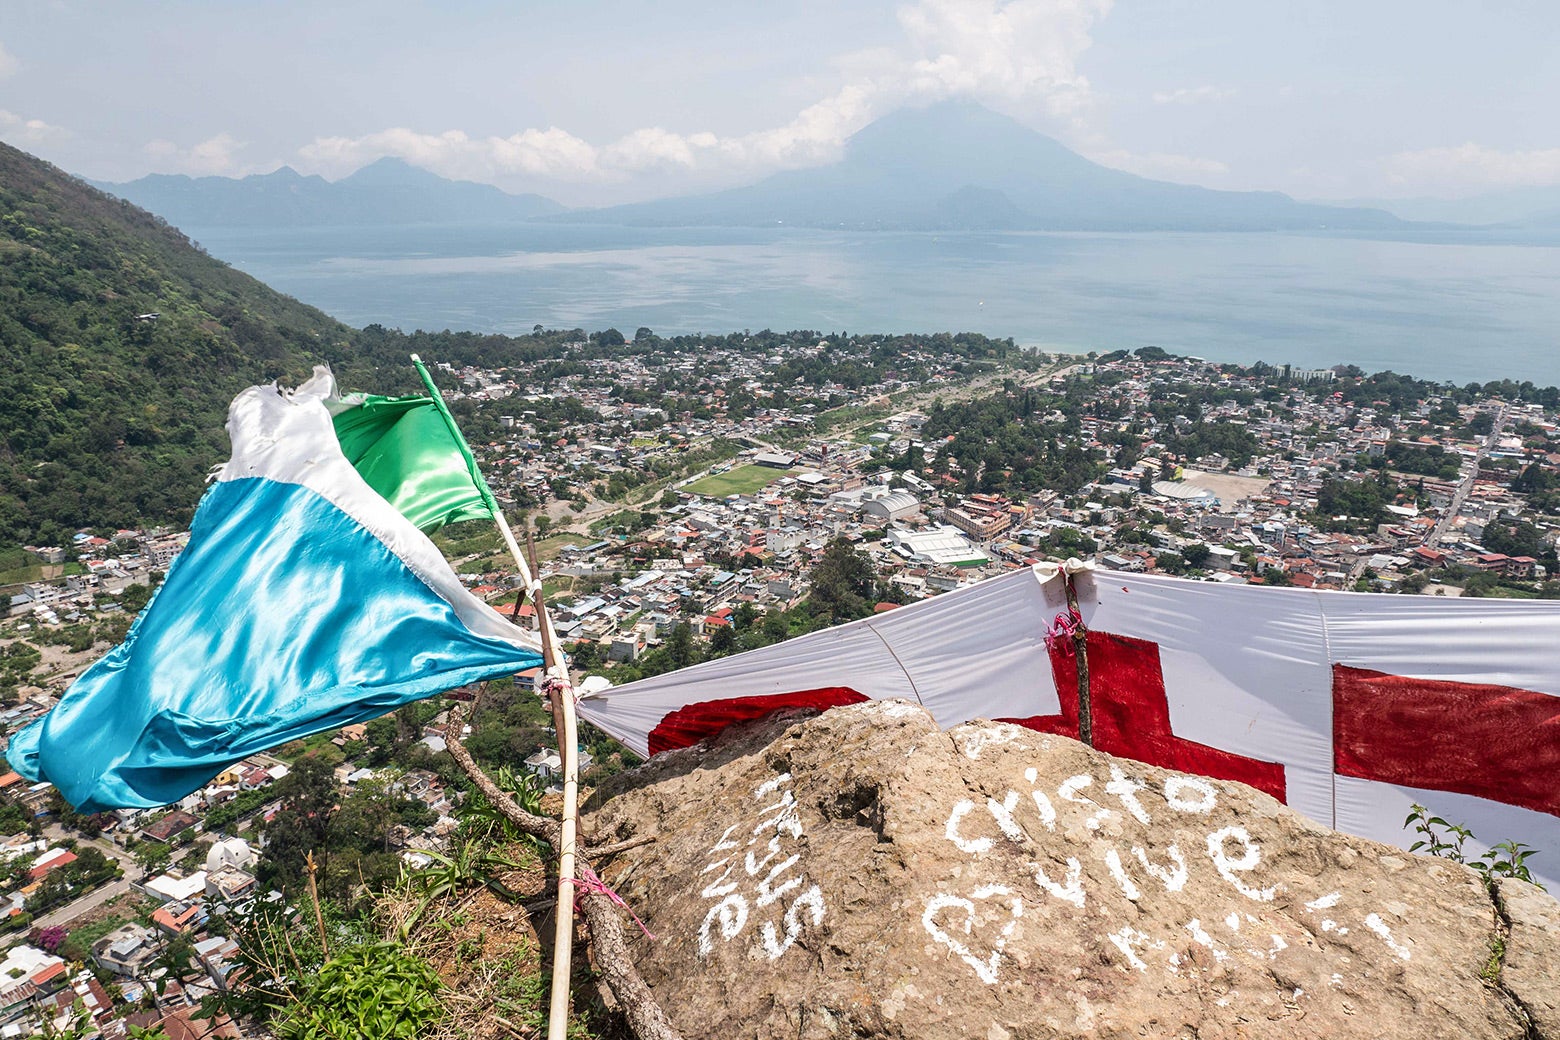 A view from above of a village nestled in mountains. Graffiti on a rock reads "Cristo Vive" next to a heart symbol.